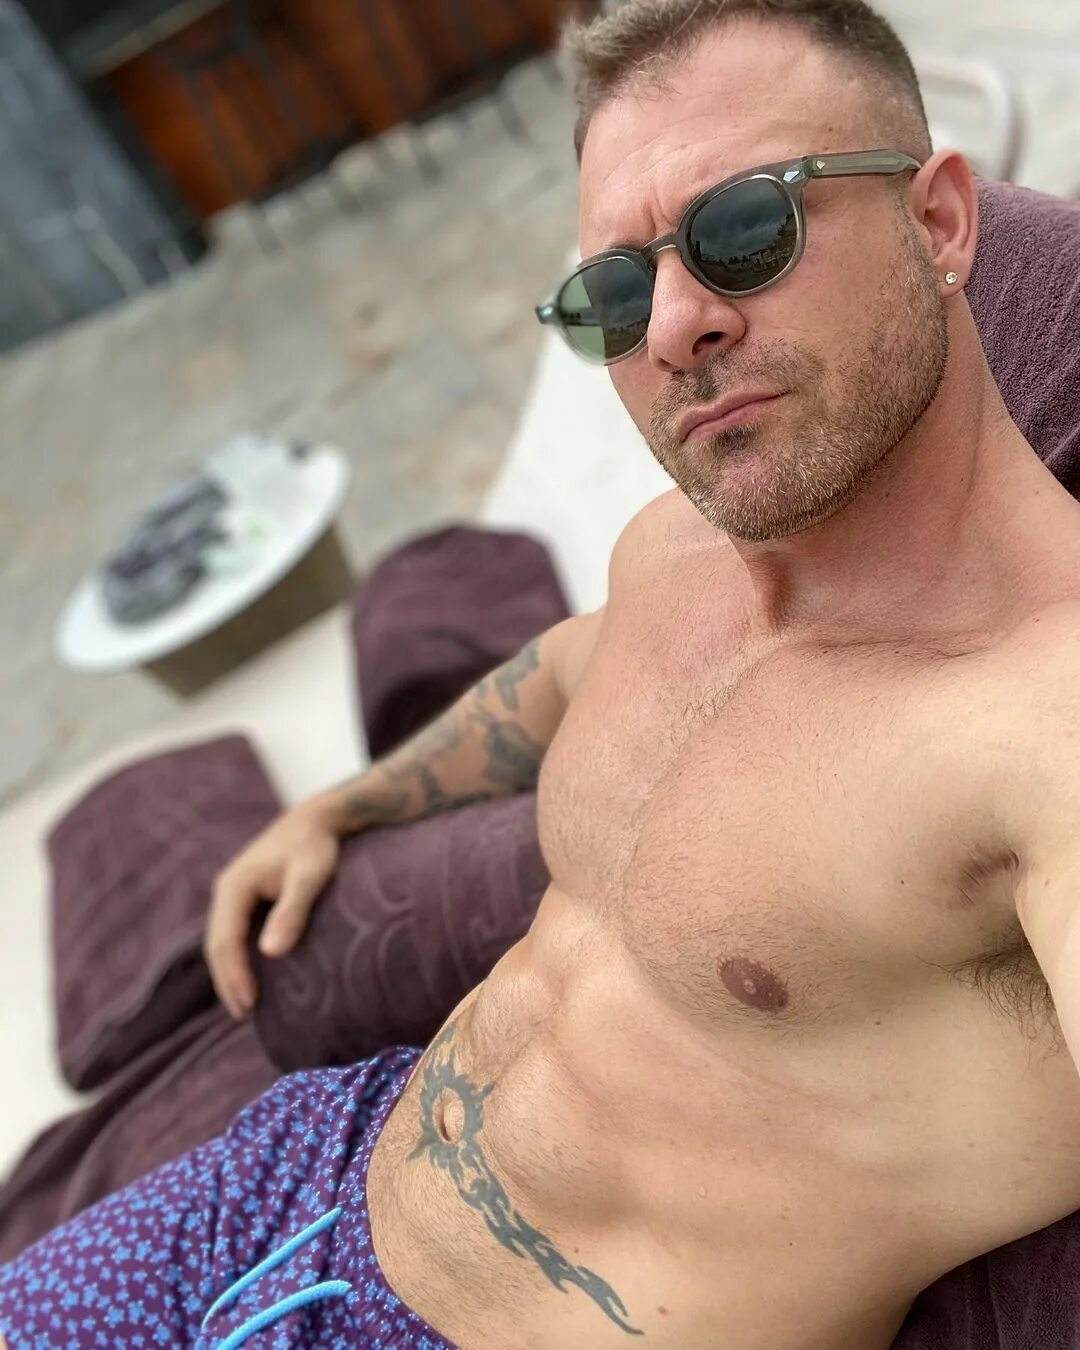 Austin Wolf on Instagram: "Time to relax. 